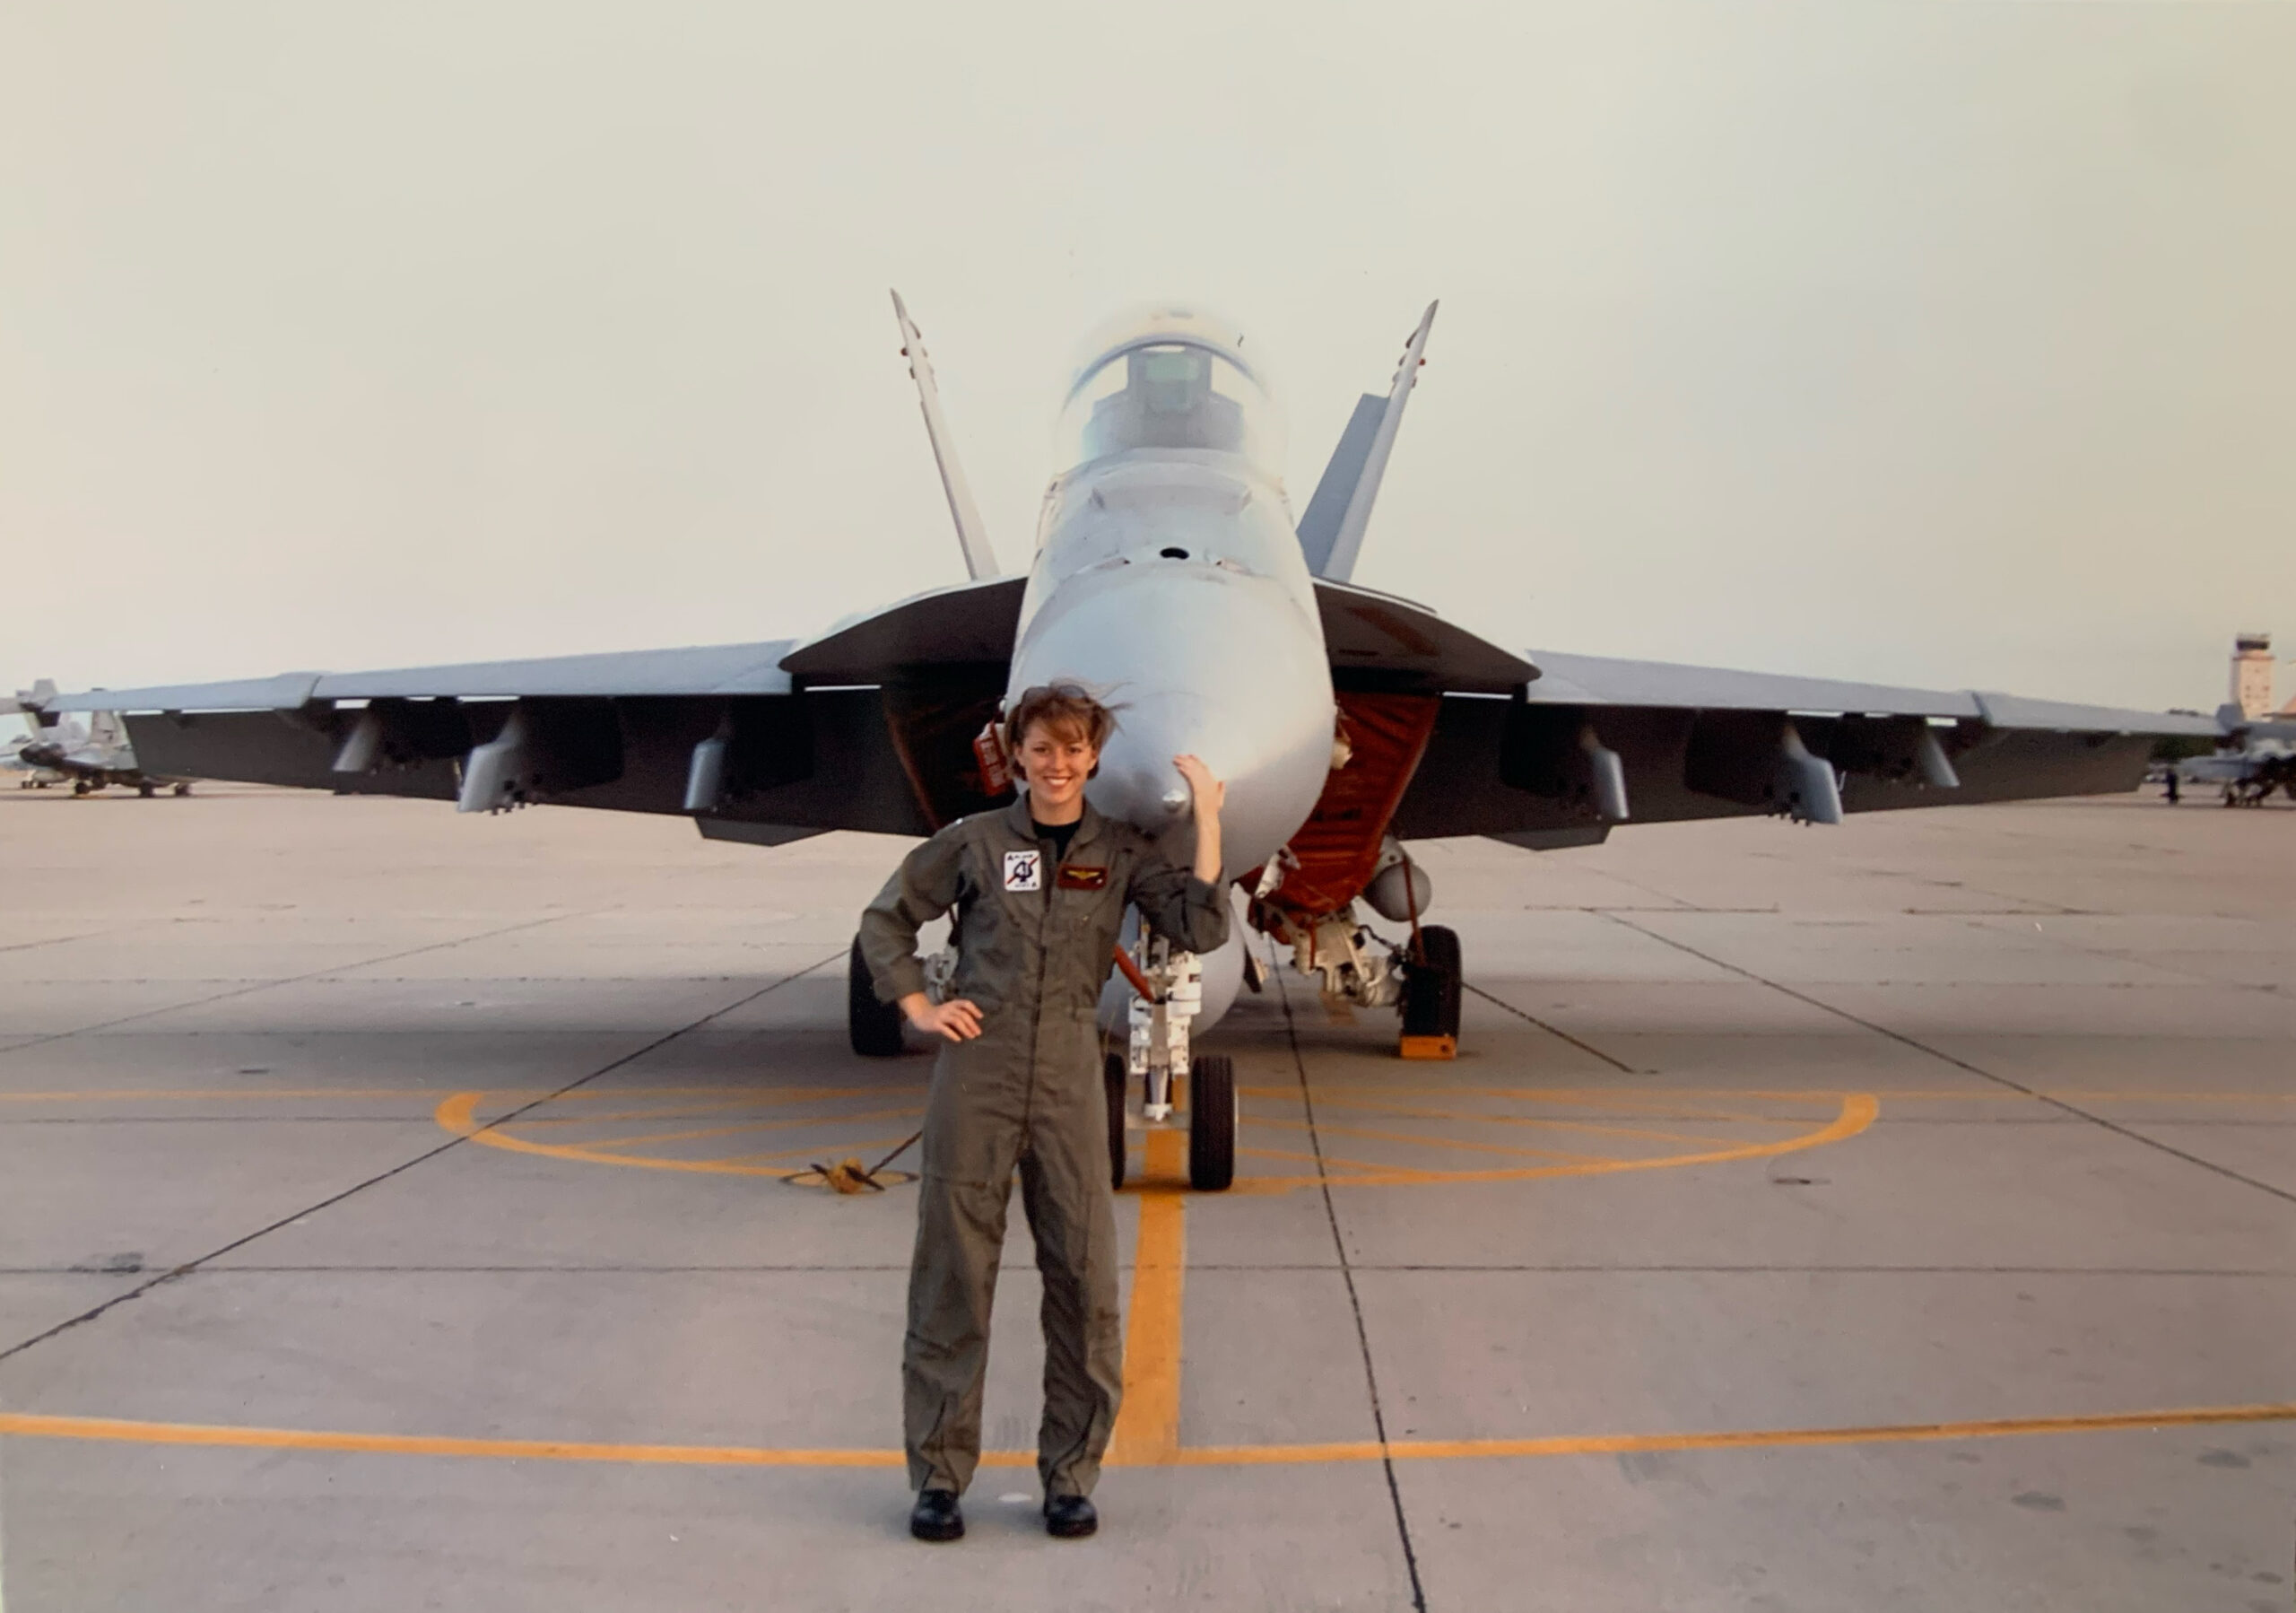 Alex Dietrich standing in front of her F/A-18 Super Hornet.